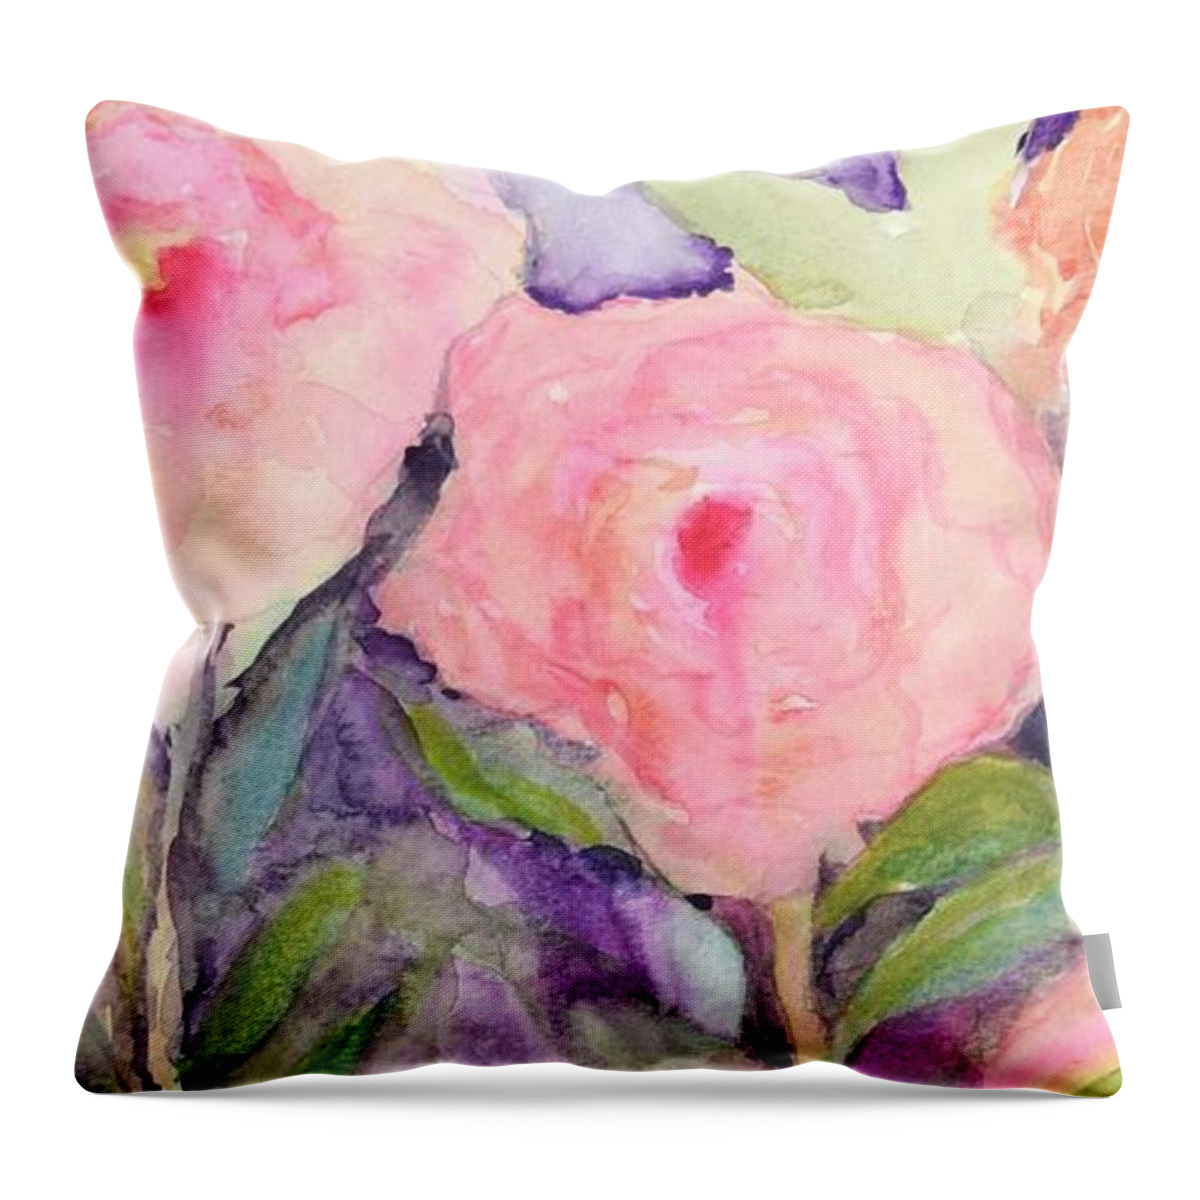  Throw Pillow featuring the painting Roses Disguised As Peonies by Barrie Stark